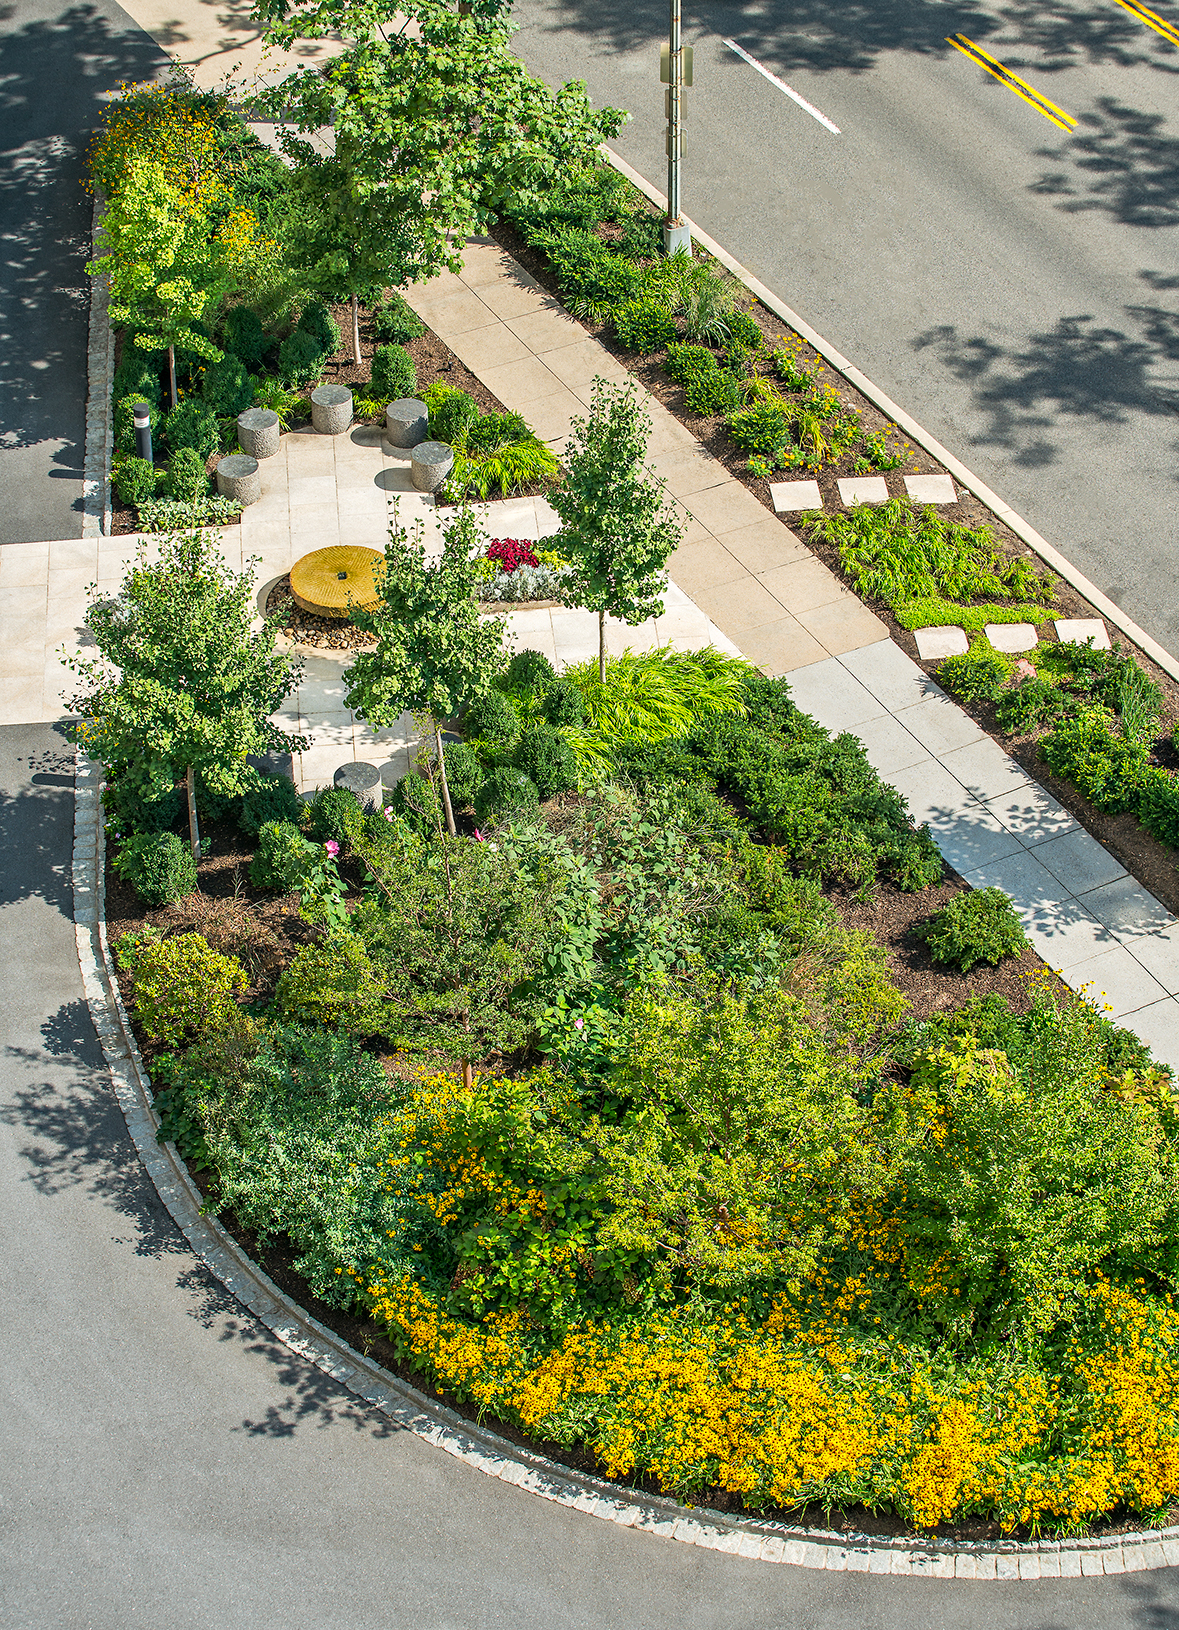   Project Location:  Washington, DC (North Cleveland Park)  Completion:  Summer 2015  General Contractor:  Denchfield Landscaping  Image By:  Allen Russ 